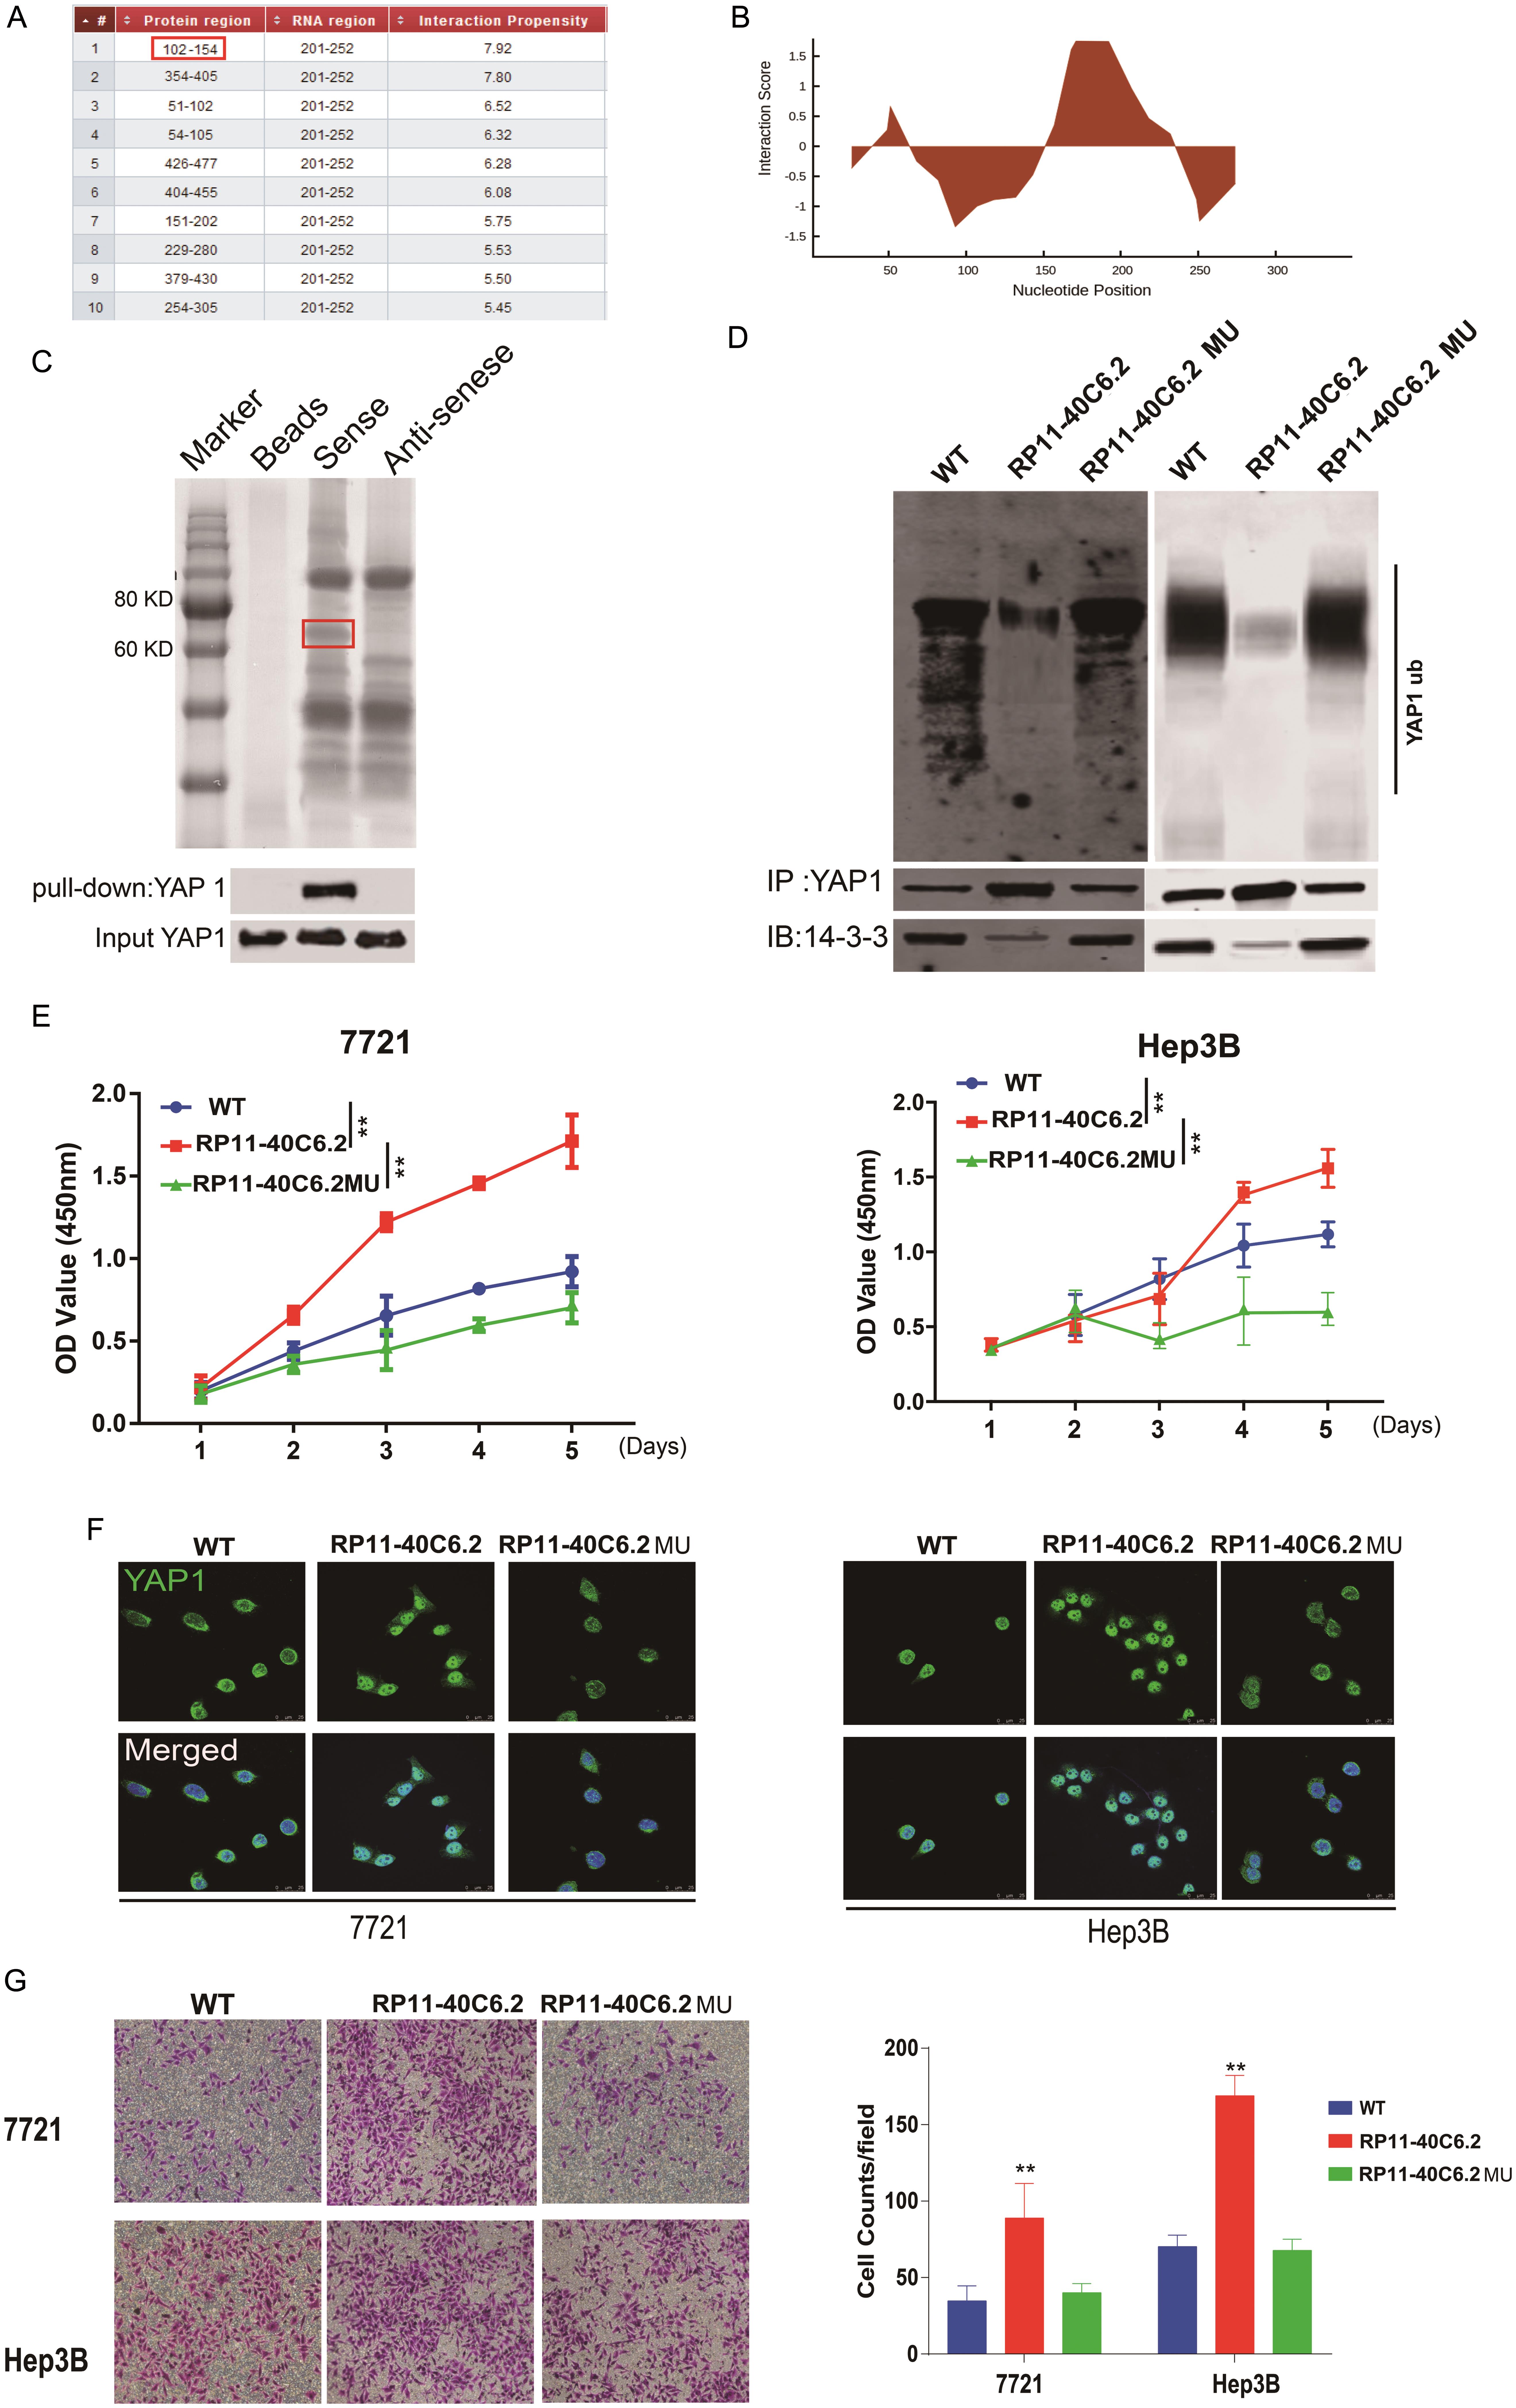 RP11-40C6.2 stabilize YAP-1 protein and activate the downstream pathway by binding to YAP1 (s127) residue.